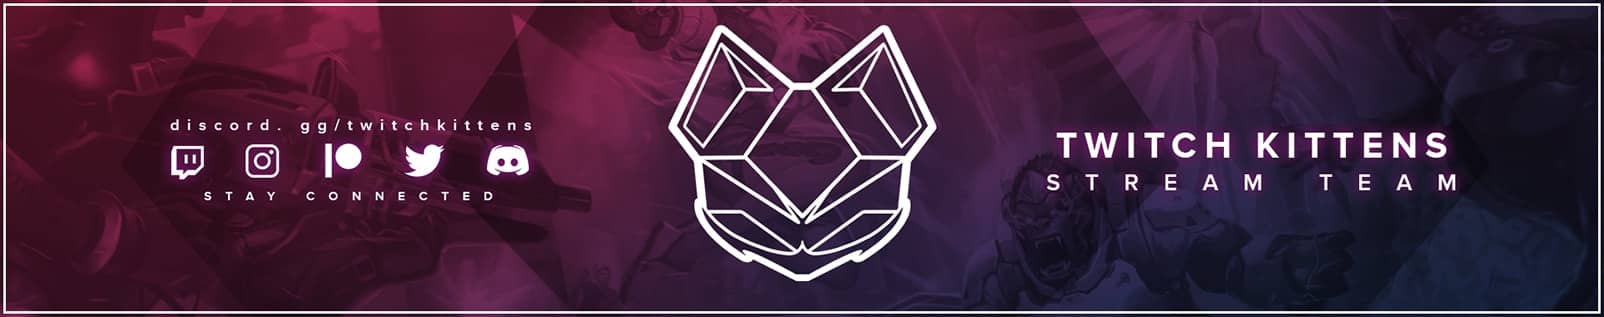 Twitch Kittens' promotional banner with social media icons